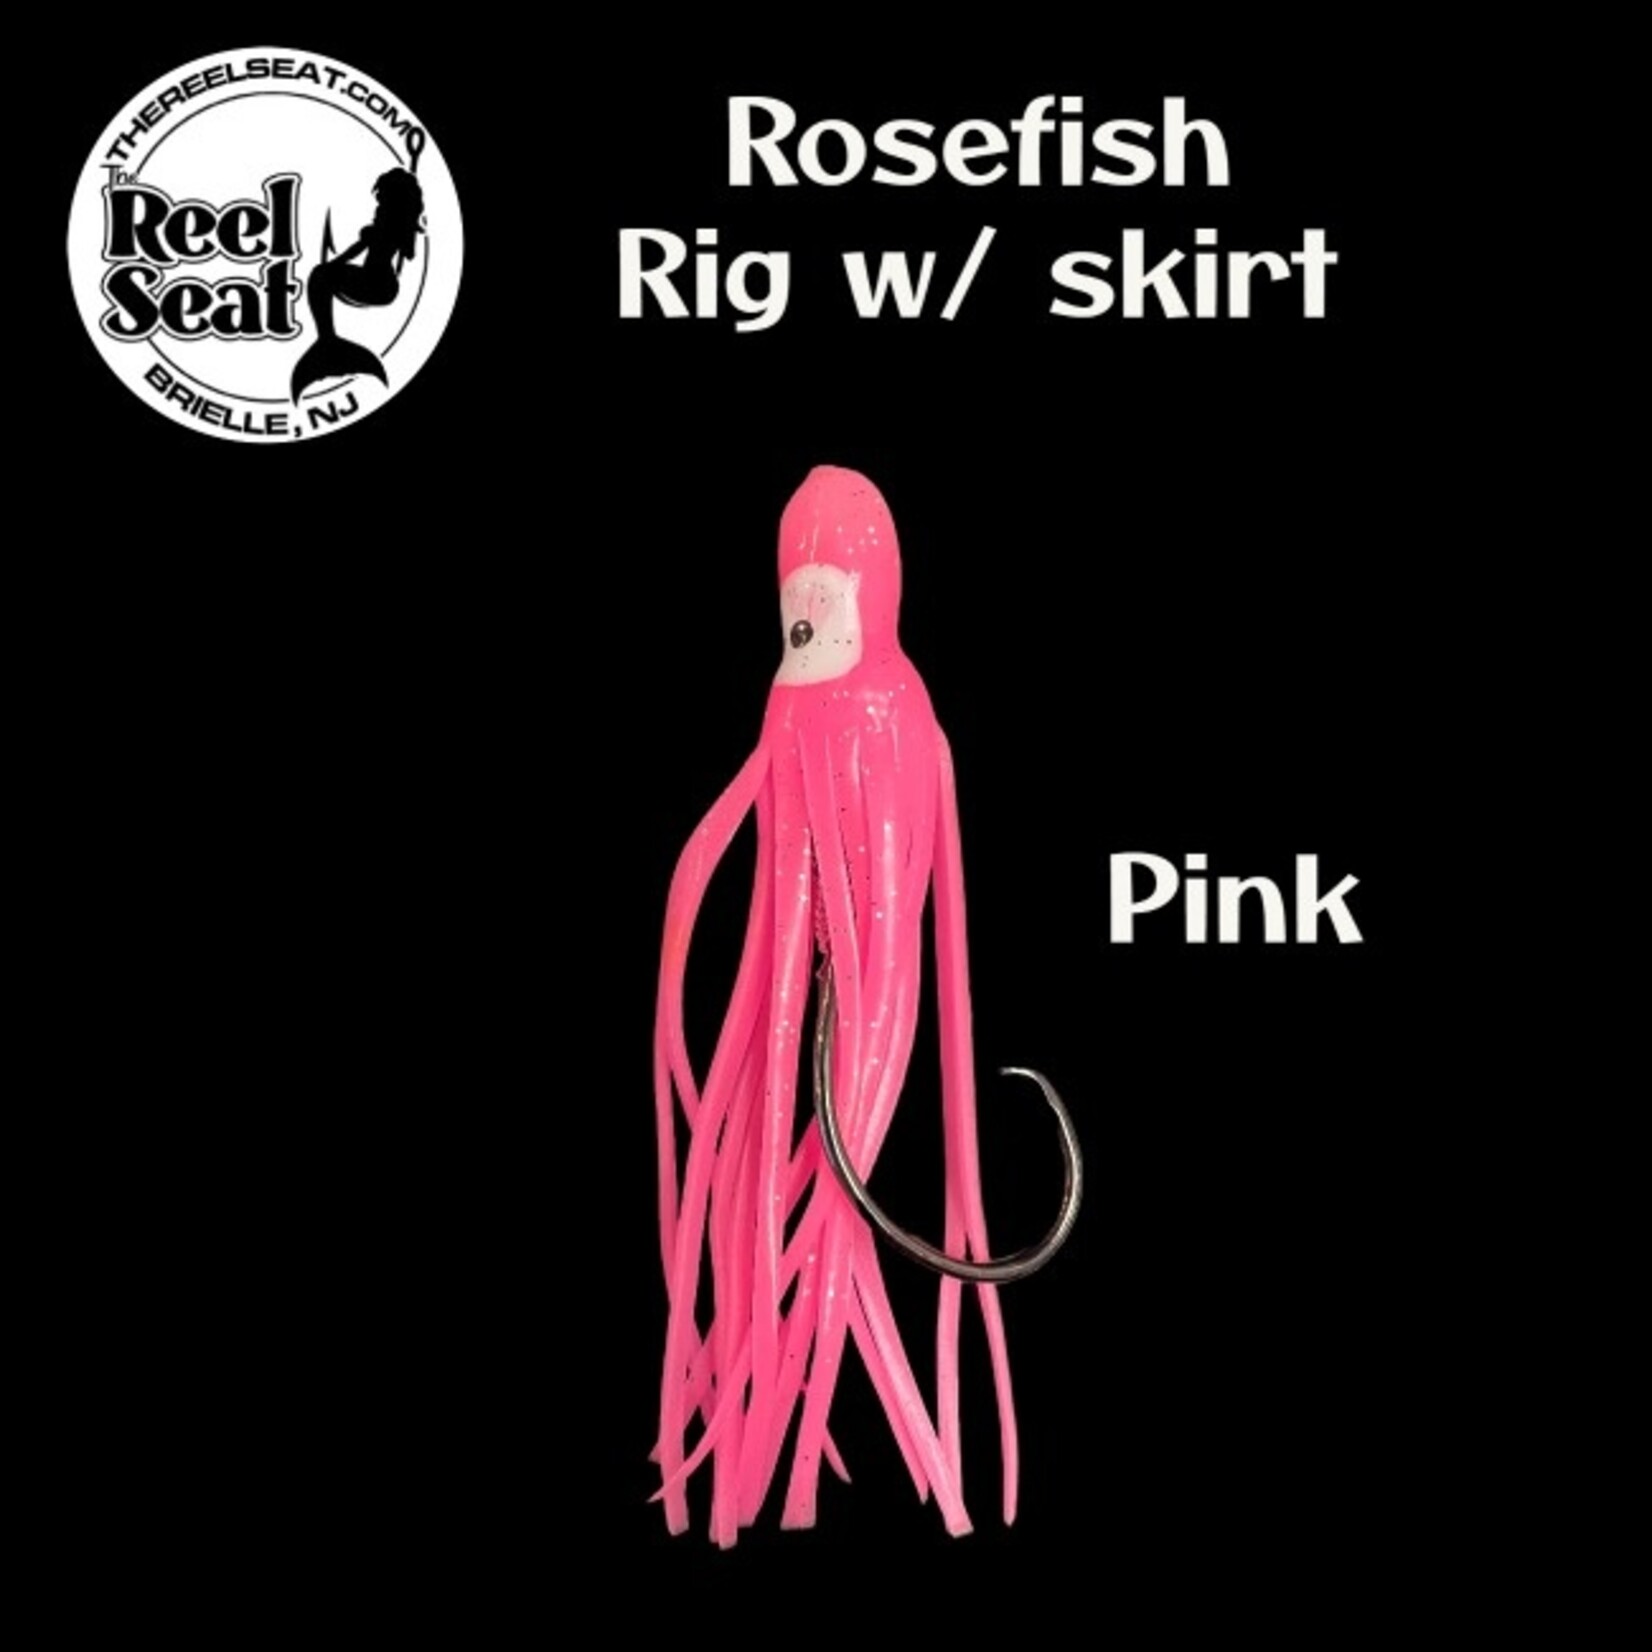 The Reel Seat RS Rosefish Rig